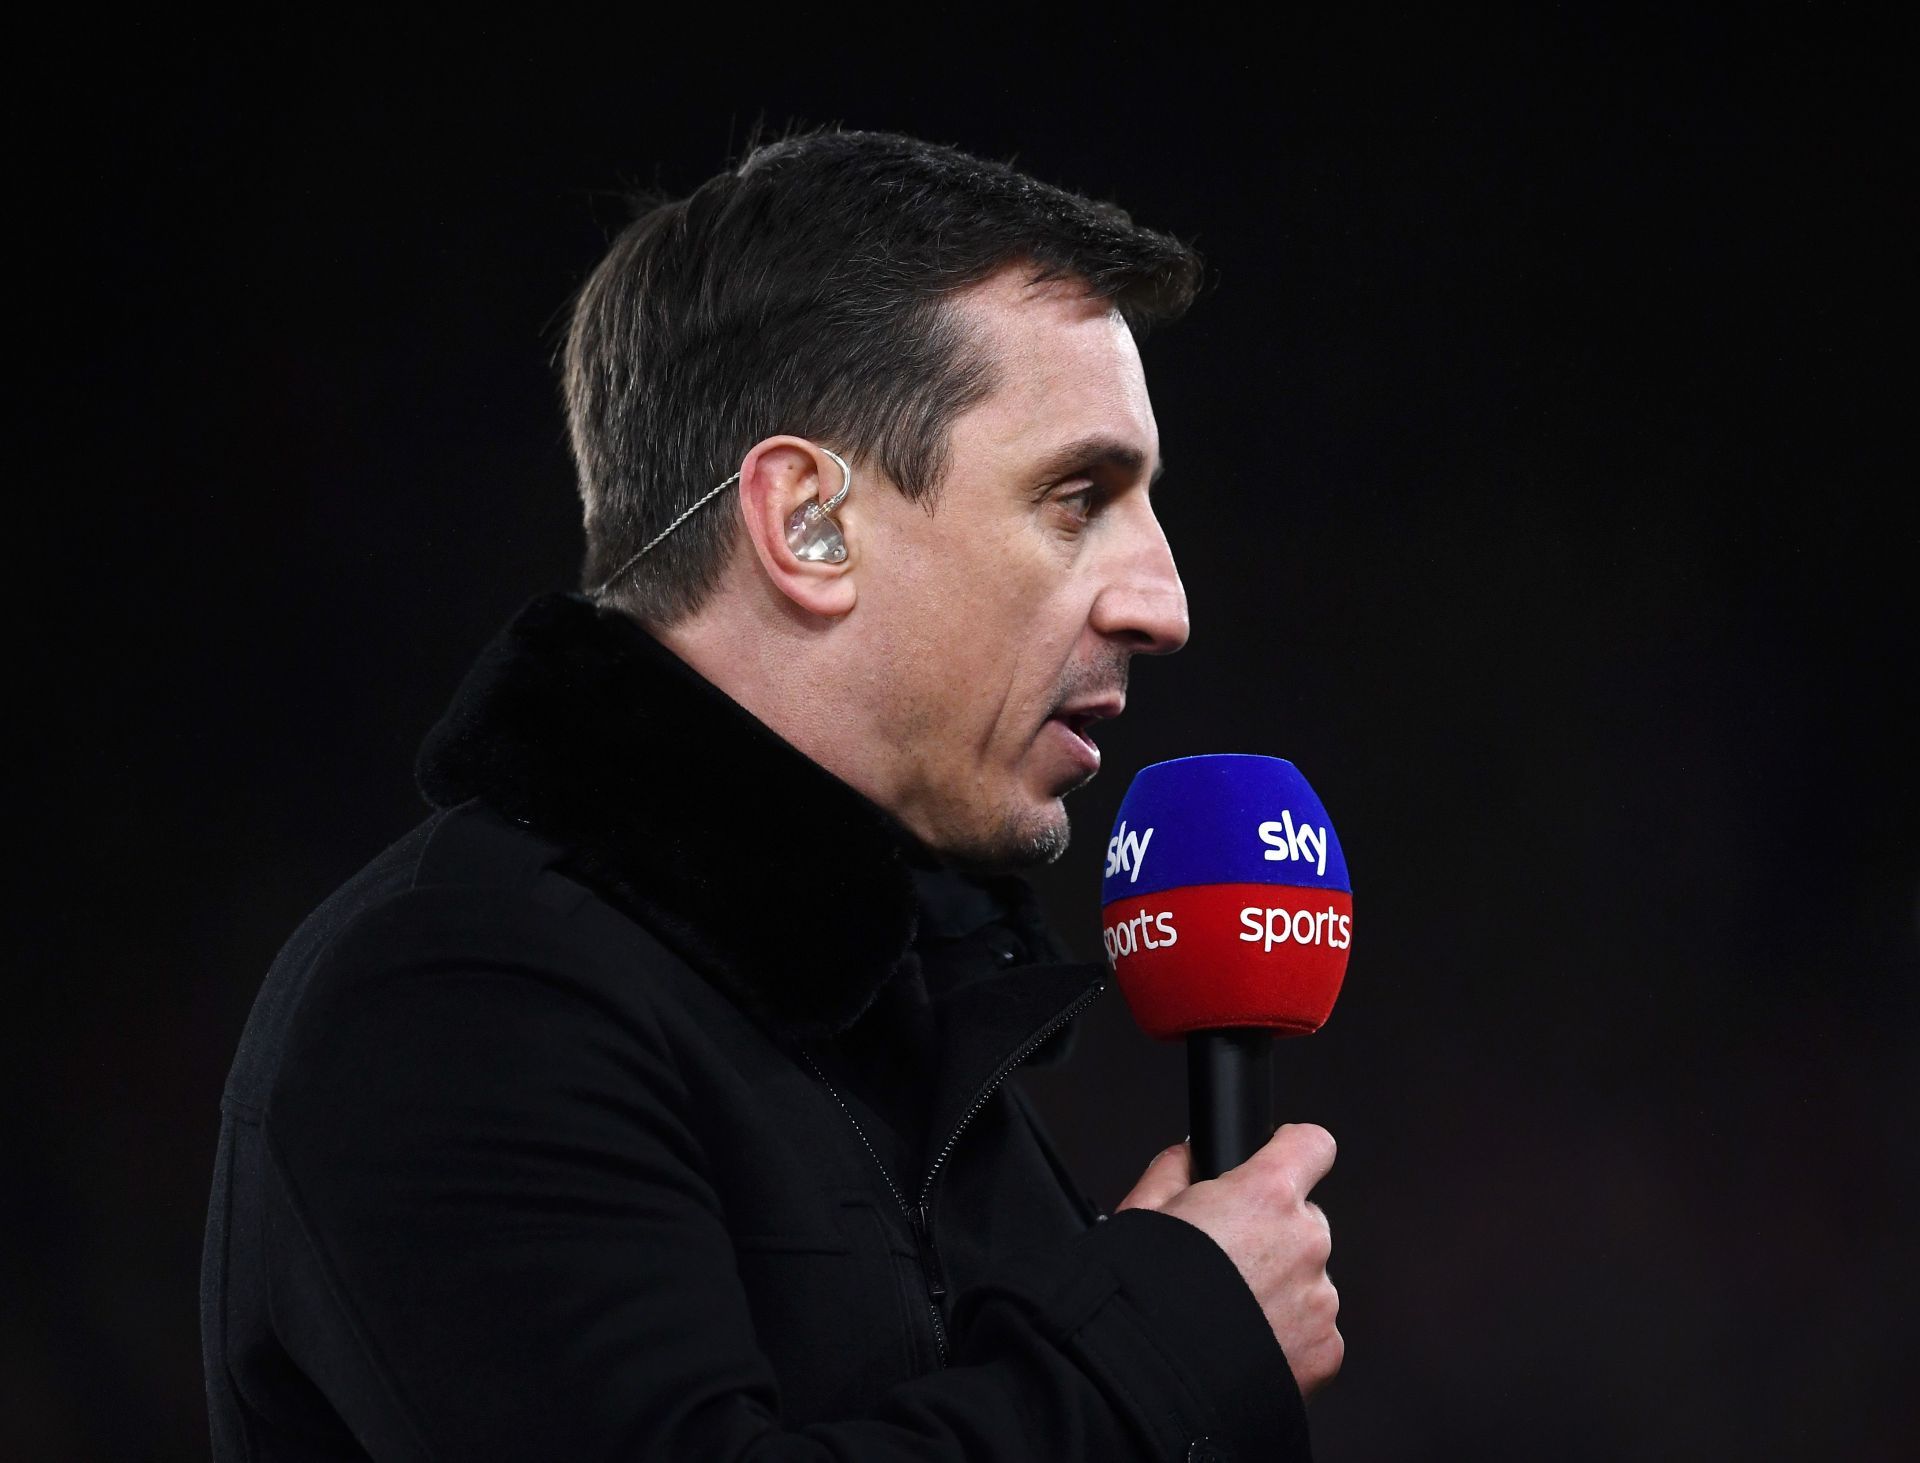 Sky Sports pundit Gary Neville. (Photo by Laurence Griffiths/Getty Images)